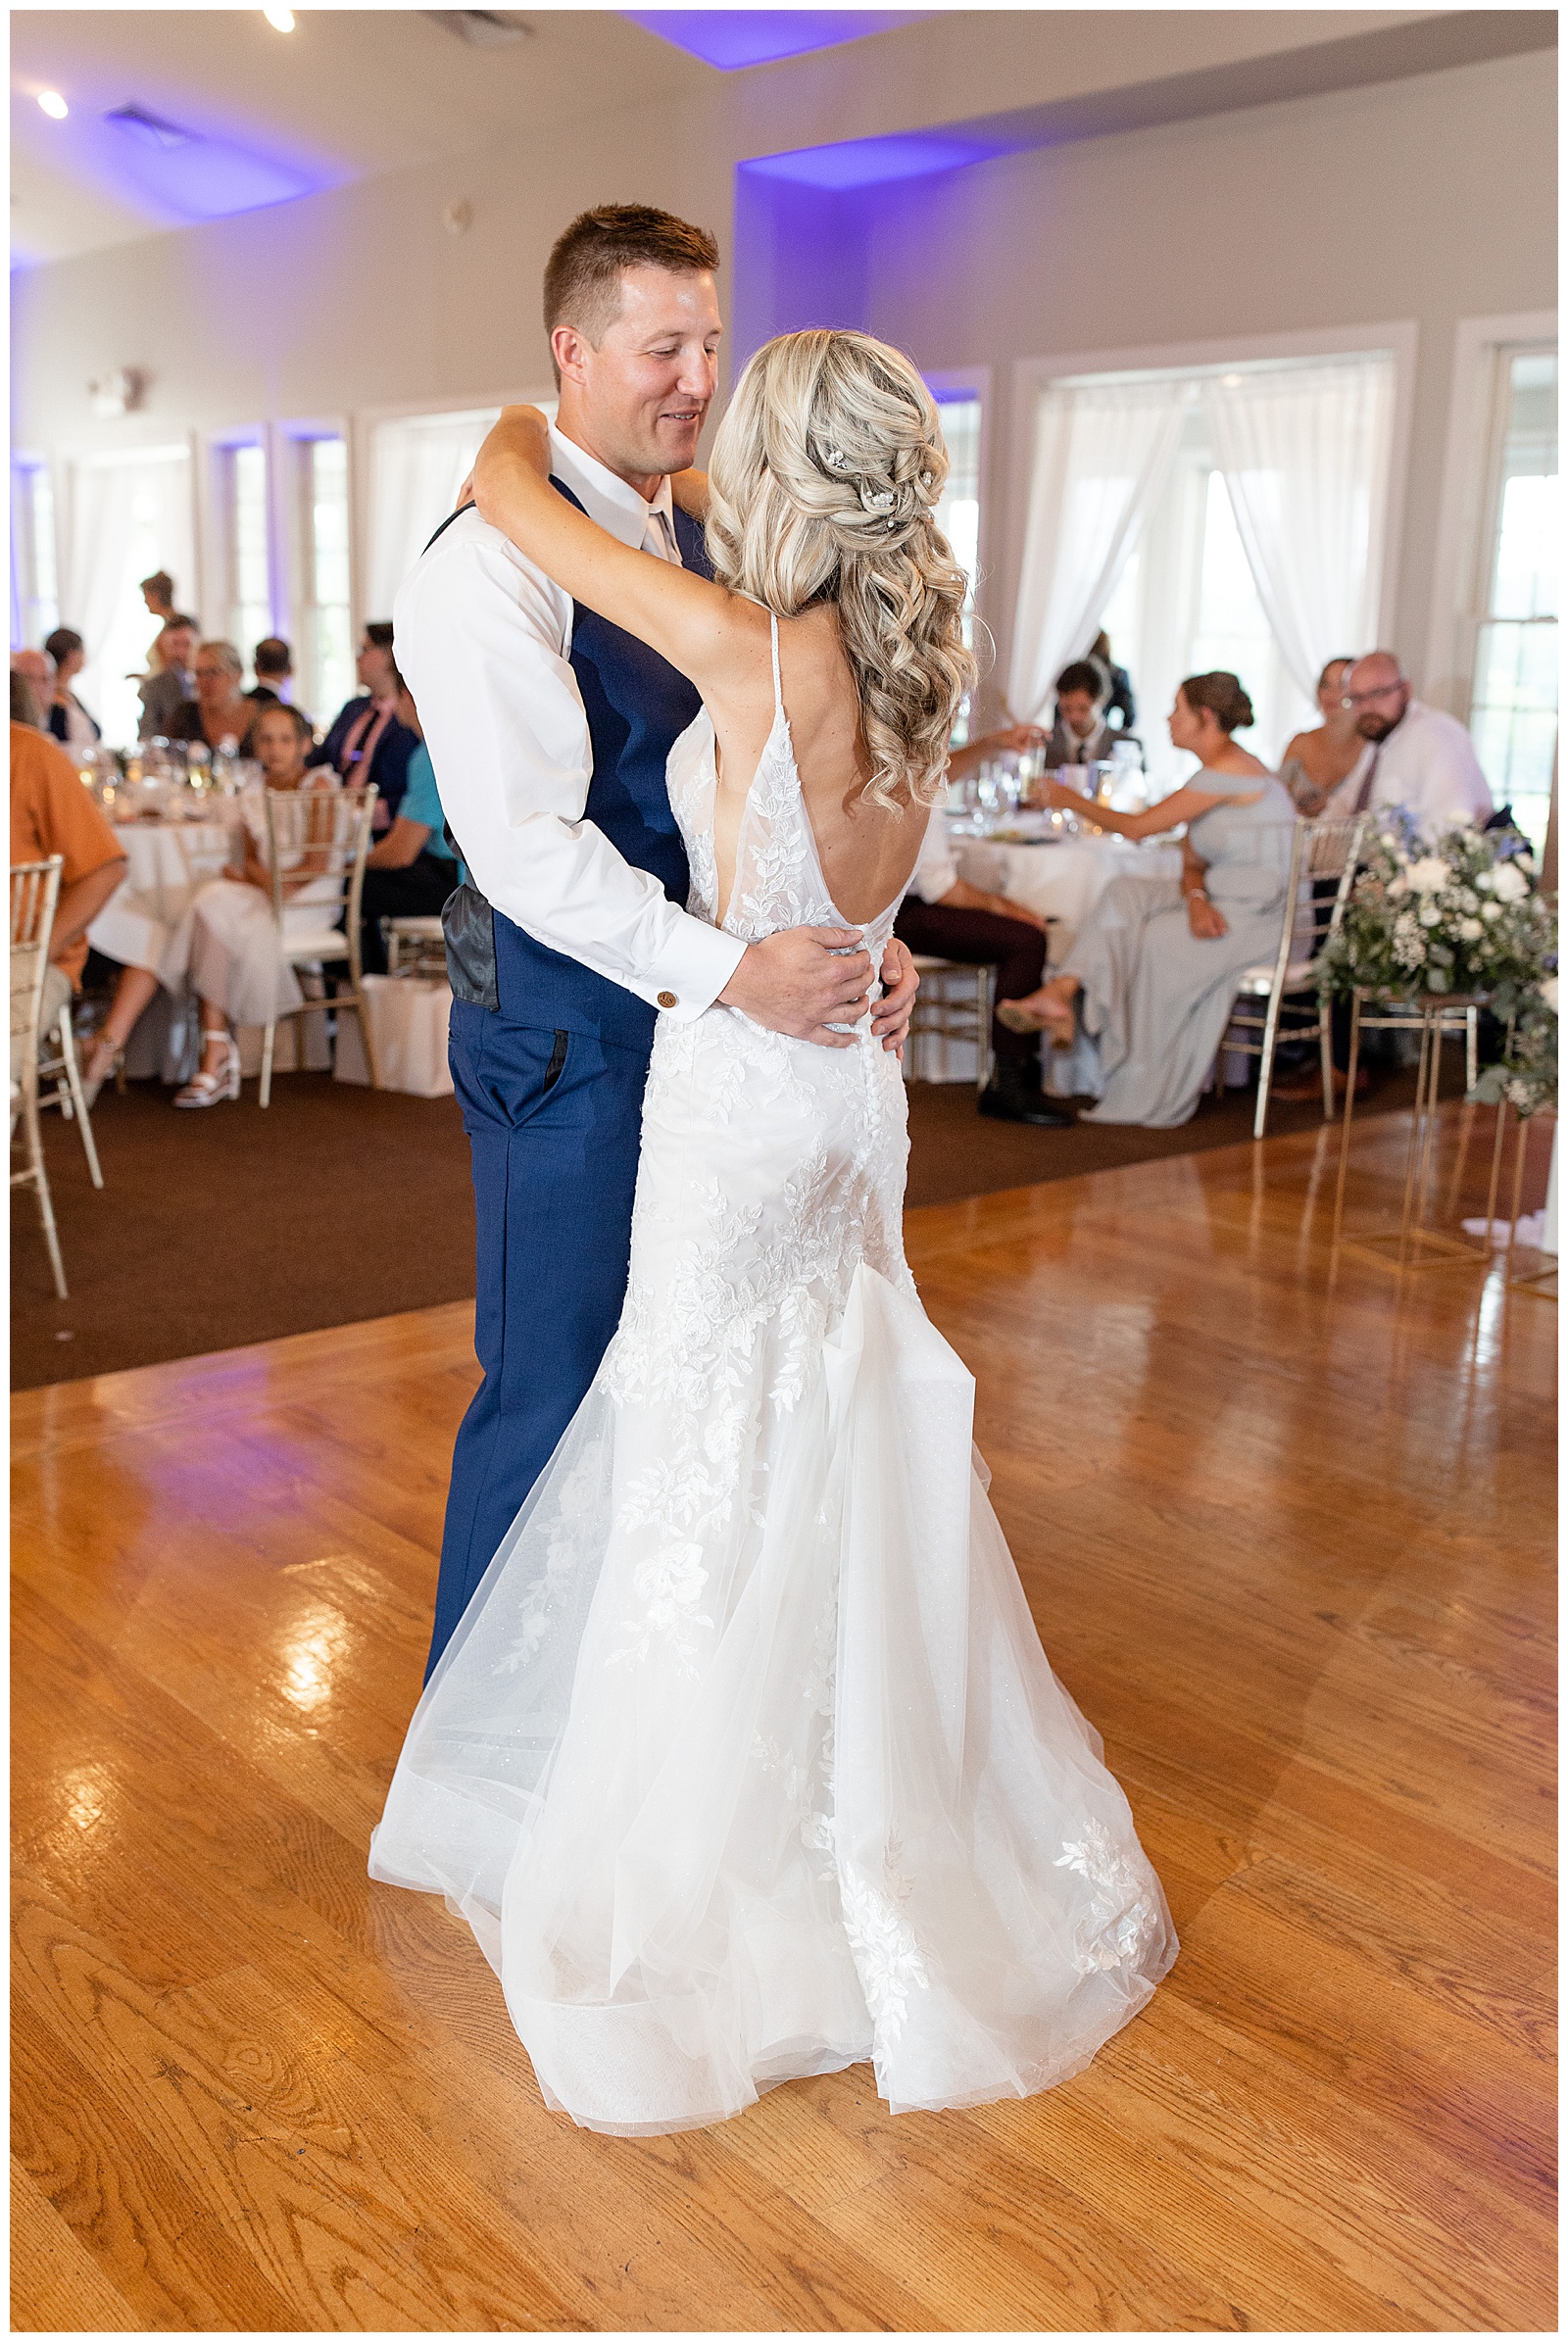 couple sharing their first dance inside reception space at the links at gettysburg as guests watch